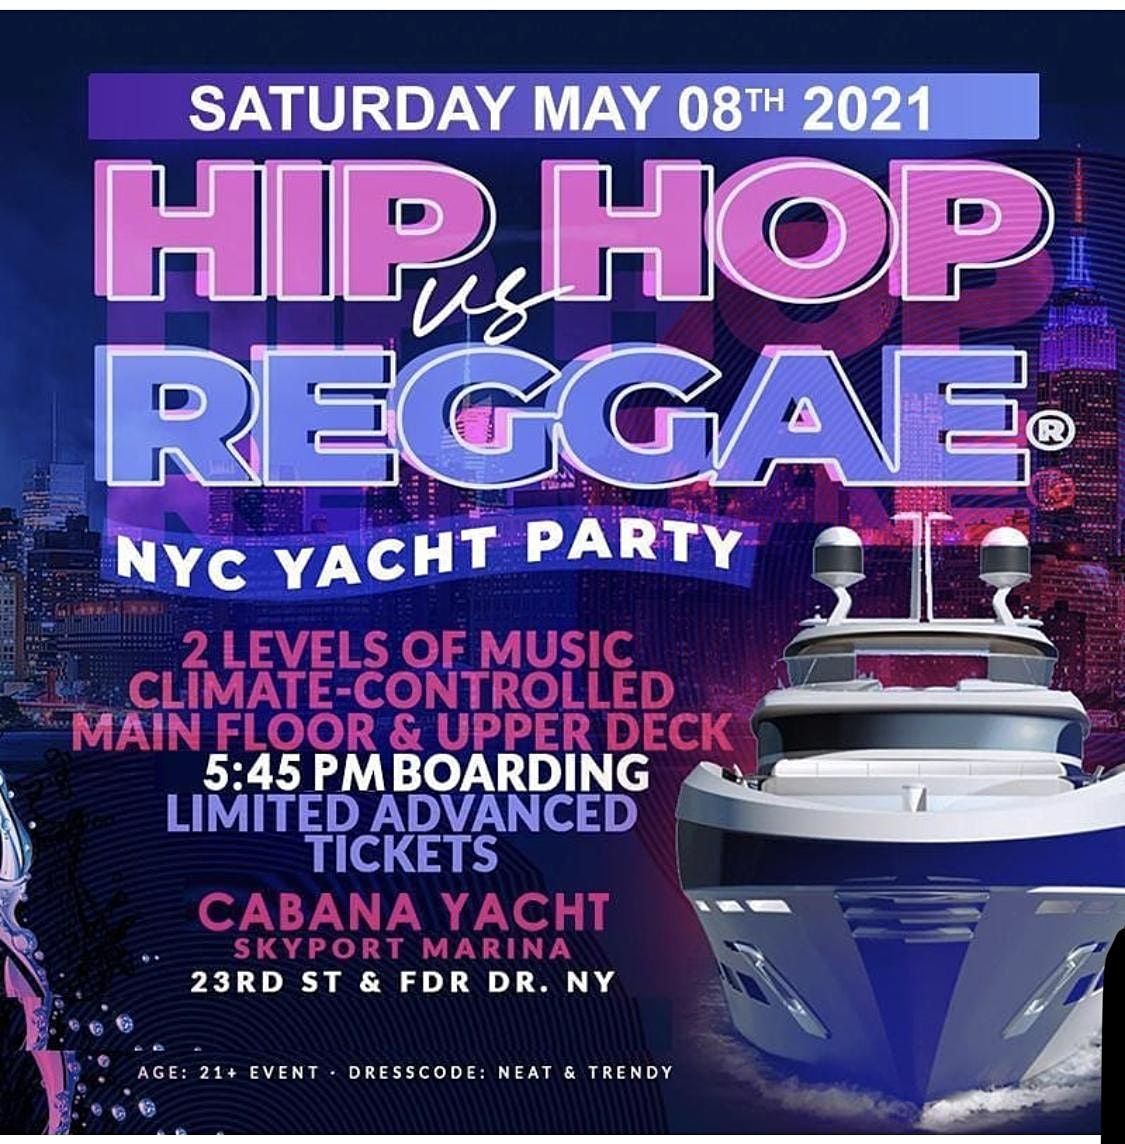 MIDNIGHT YACHT PARTY NYC! Sat., August 7th